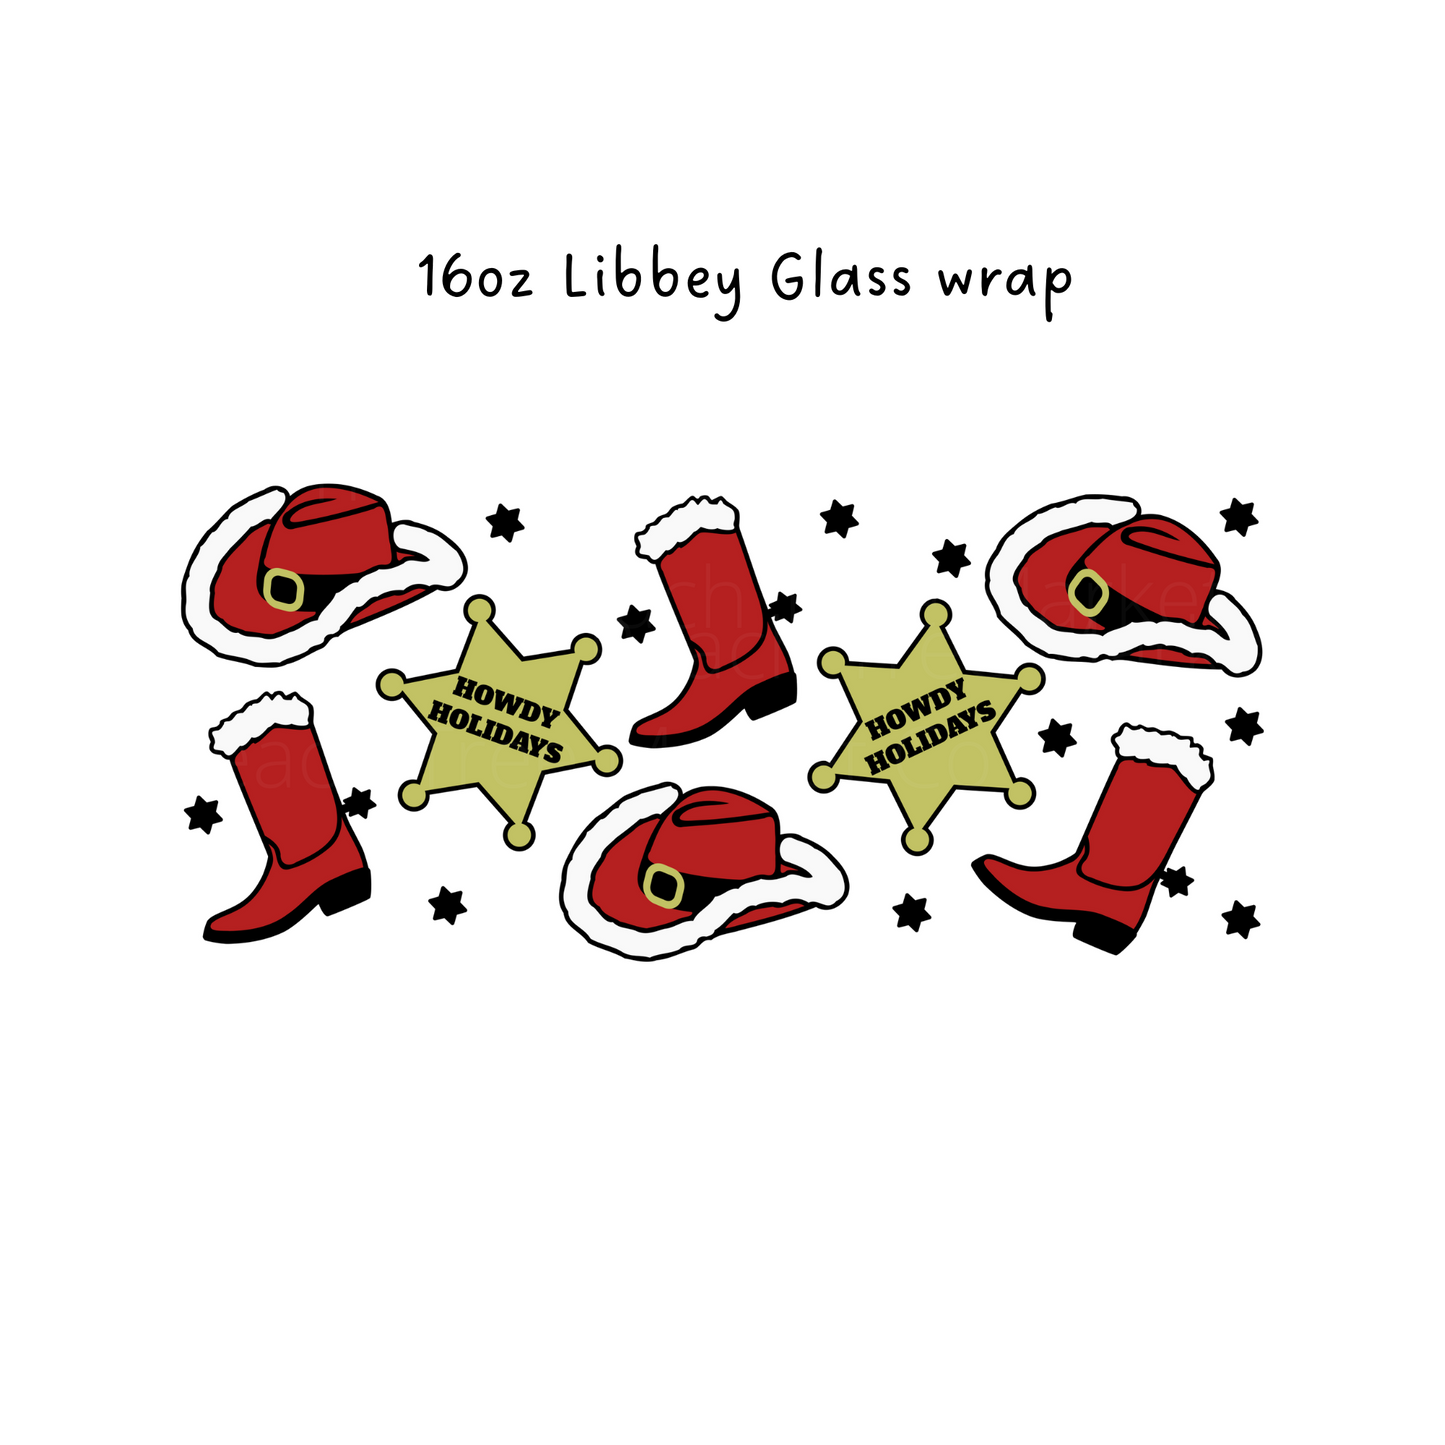 Howdy Holidays 16 Oz Libbey Beer Glass Wrap